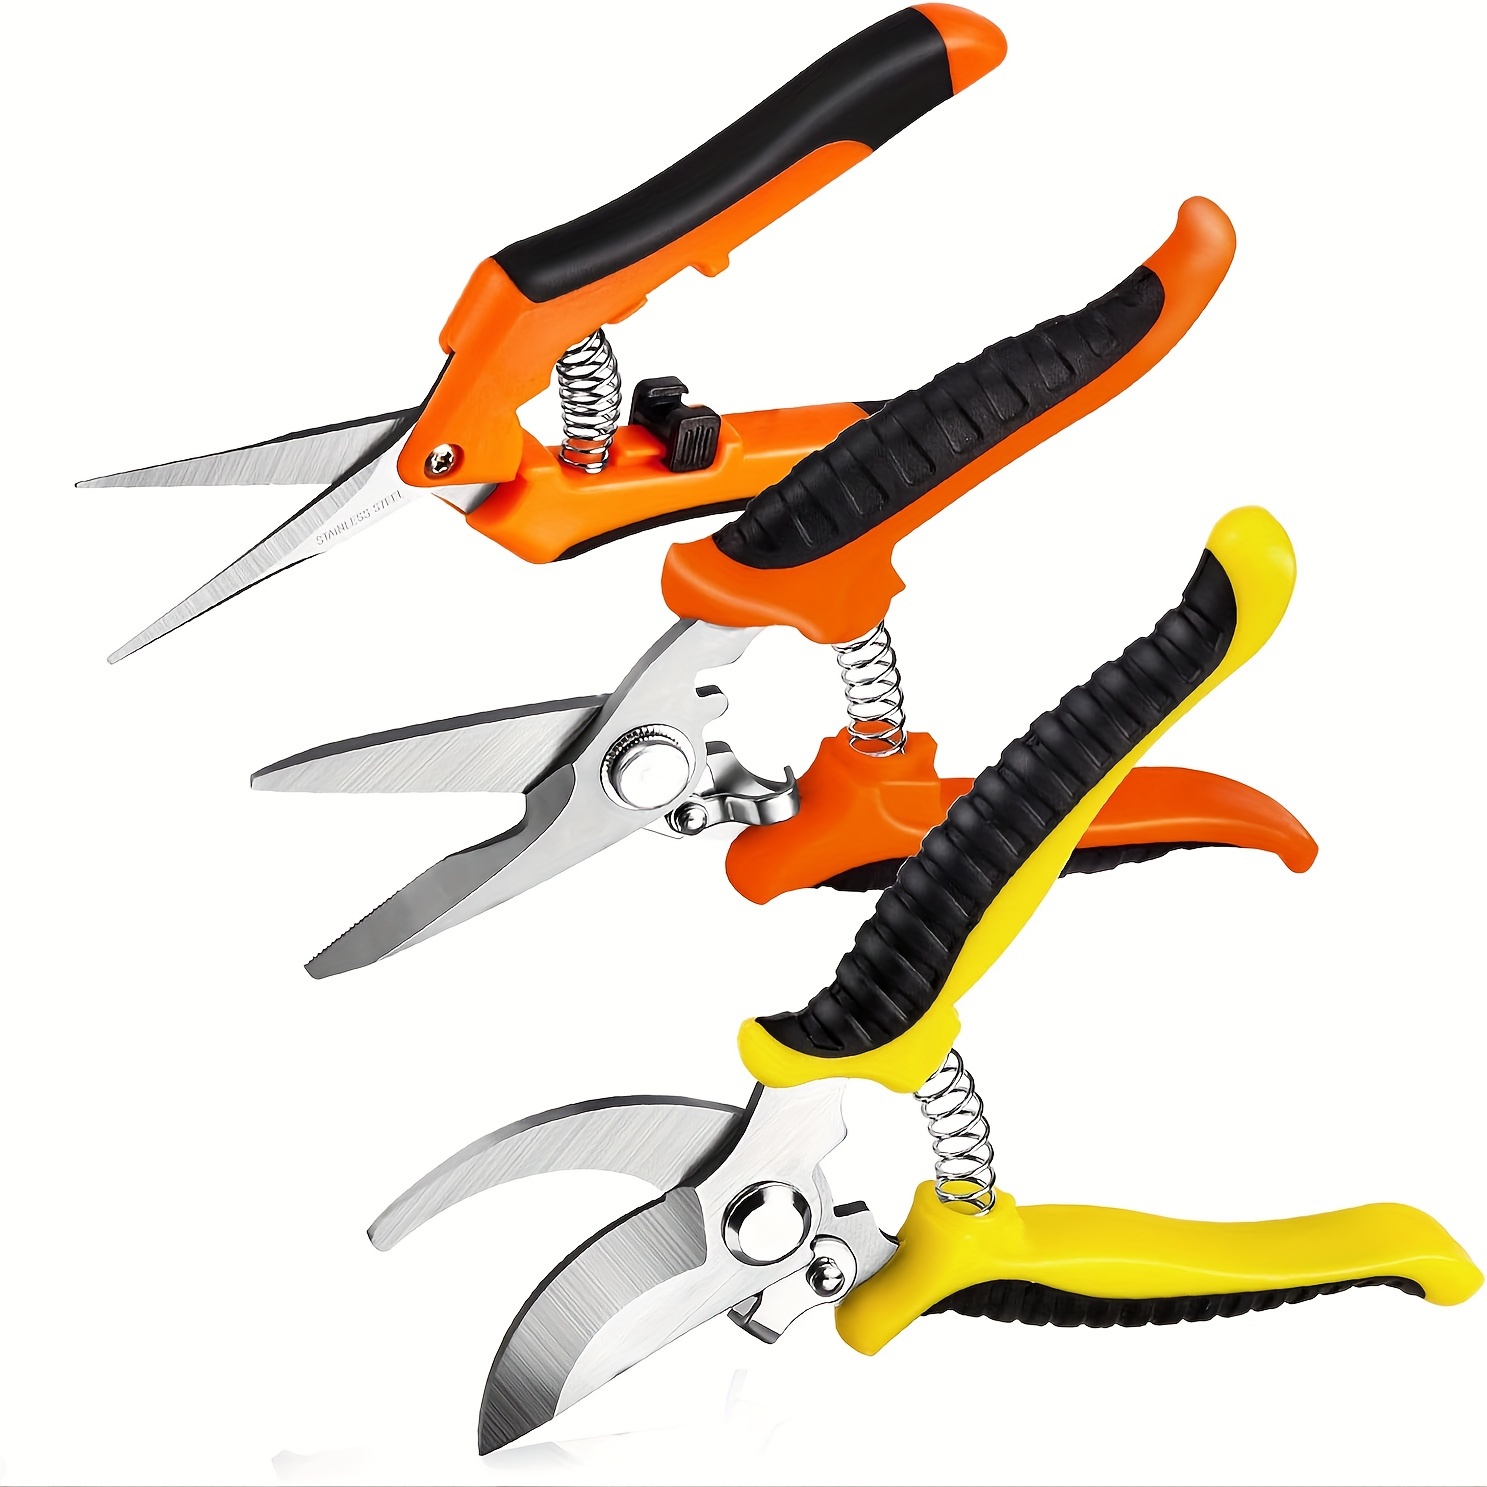 

3-piece Garden Shears Set - Classic Style, Metal Alloy Steel Blades, Pruning Shears, Gardening Trimming Scissors With Straight, Serrated, And Curved Blades - Durable Handheld Pruner Set